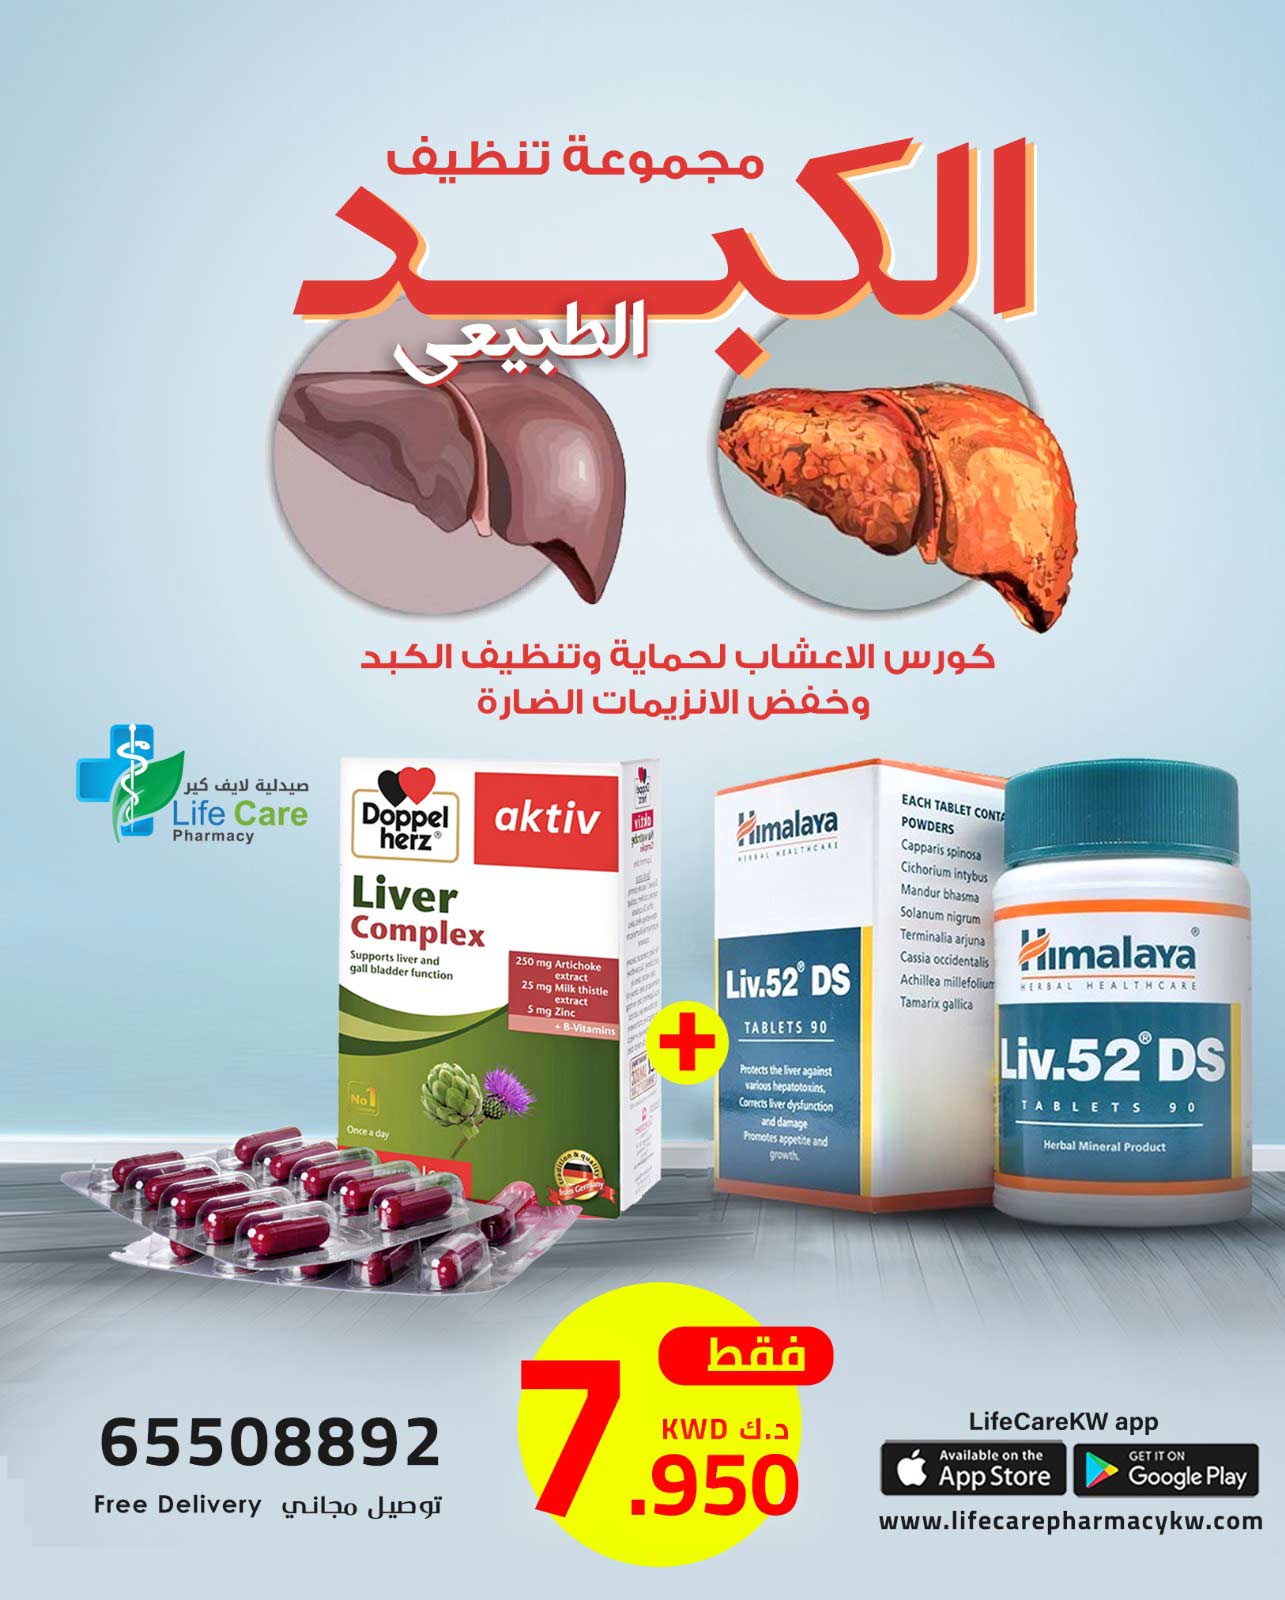 PACKAGE 237 - Life Care Pharmacy